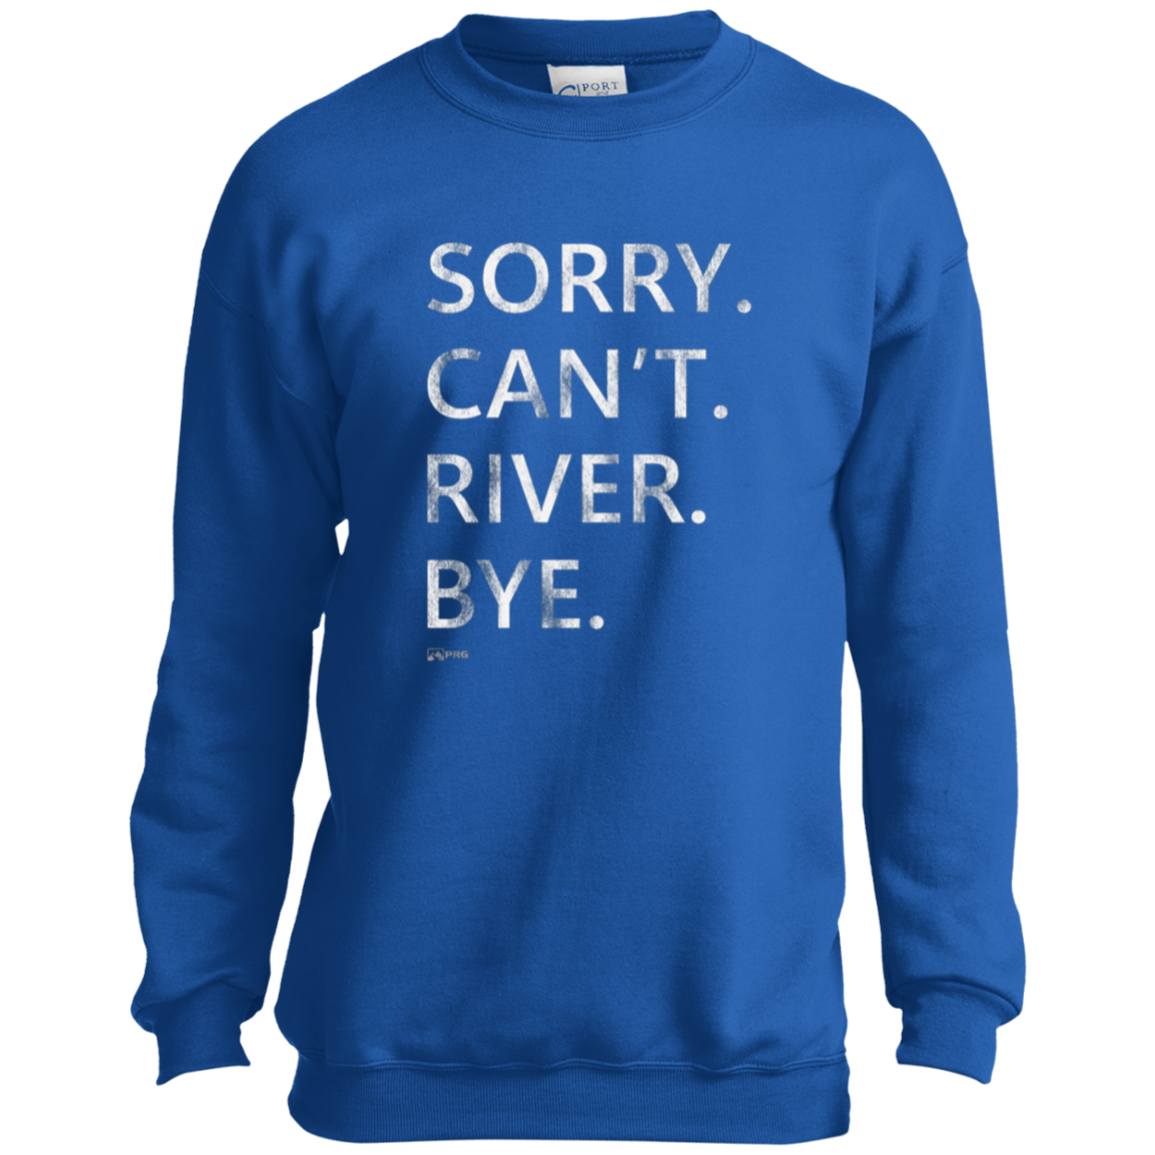 Sorry. Can't. River. Bye. - Youth Sweatshirt